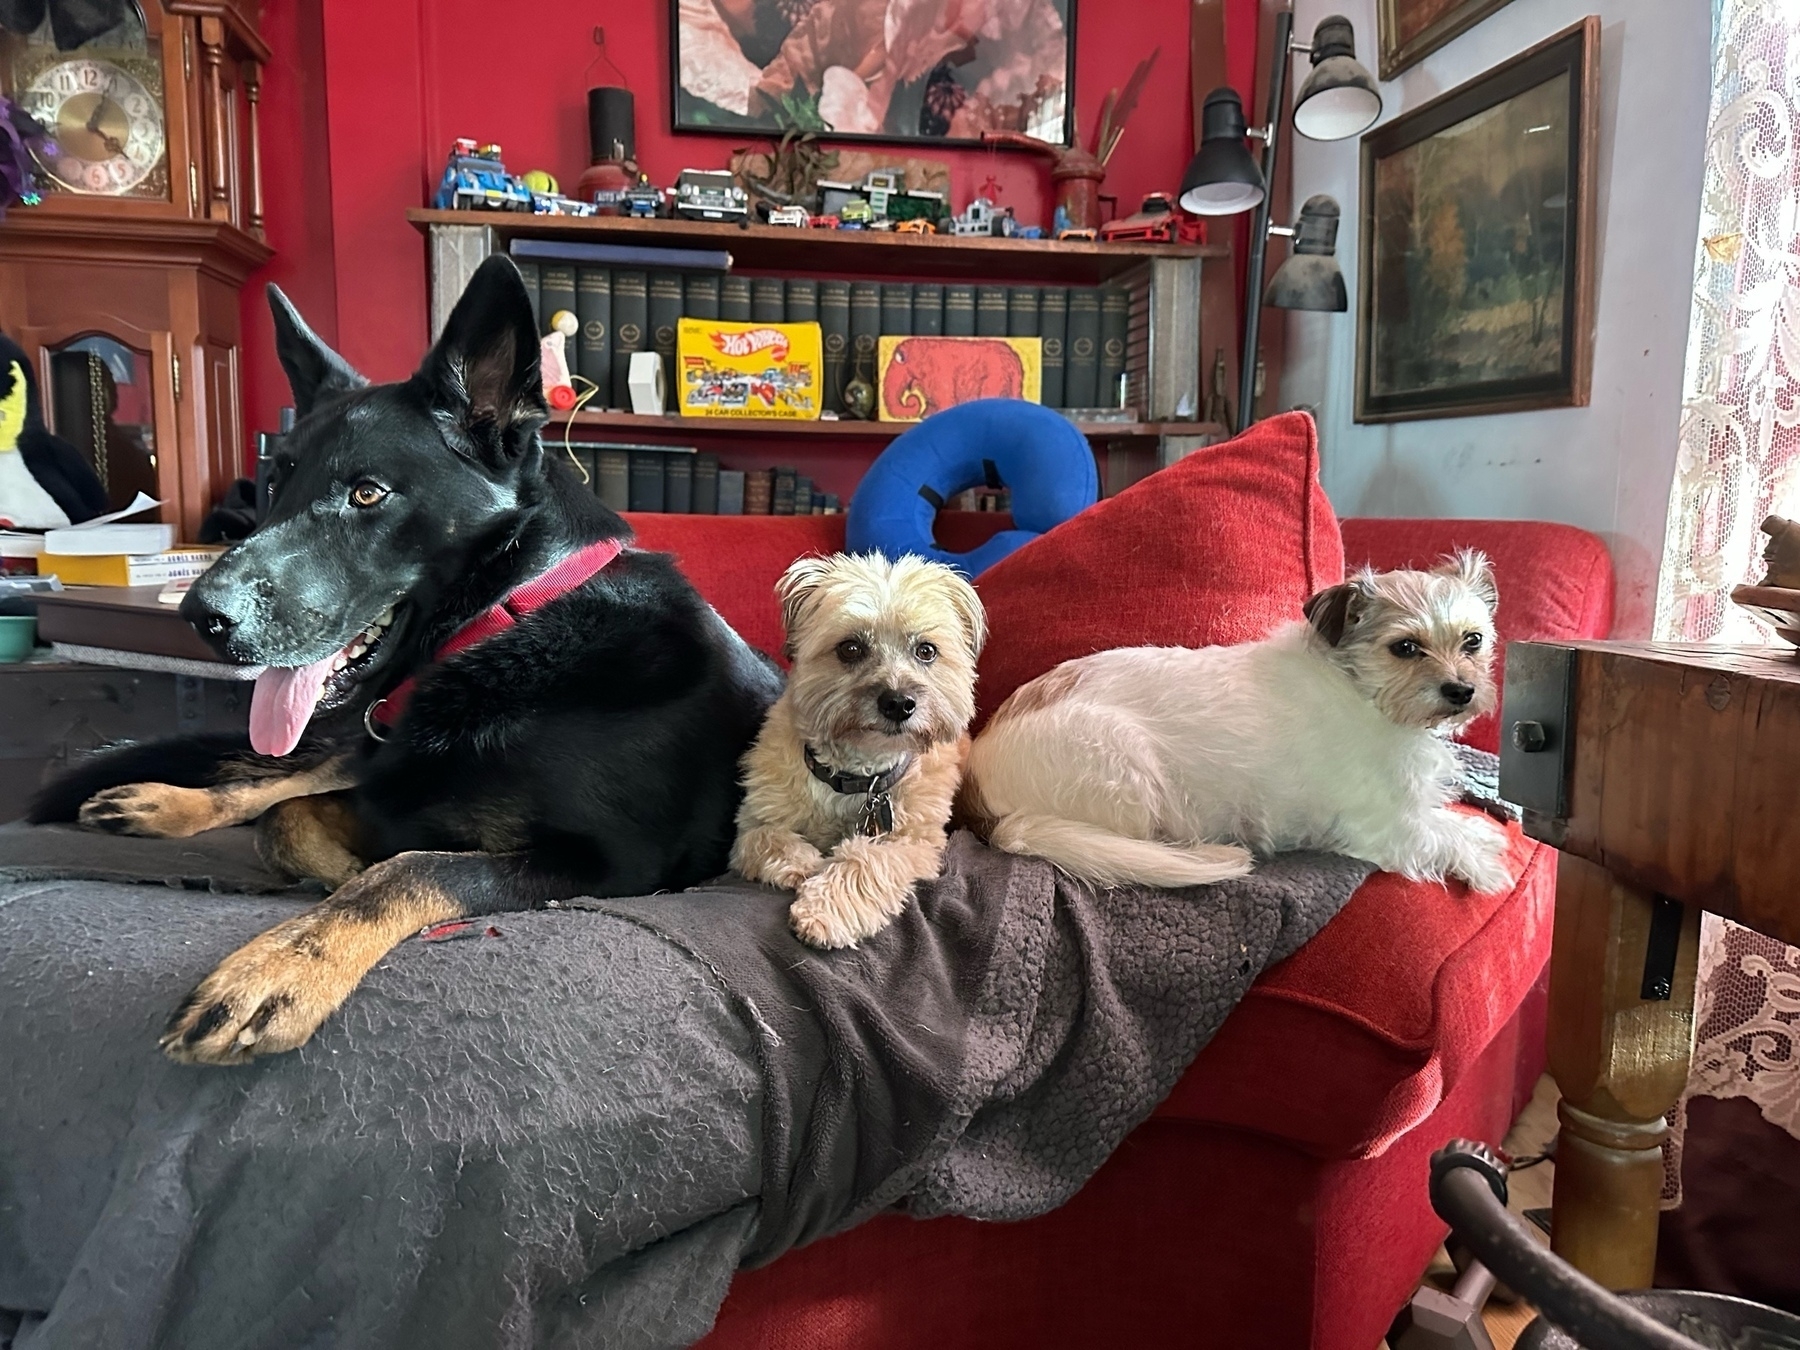 three dogs on a red chaise from L to R: Kirby, the German Shepherd; Hildy, The Morkie; Izzy, the Jorkie (we think)